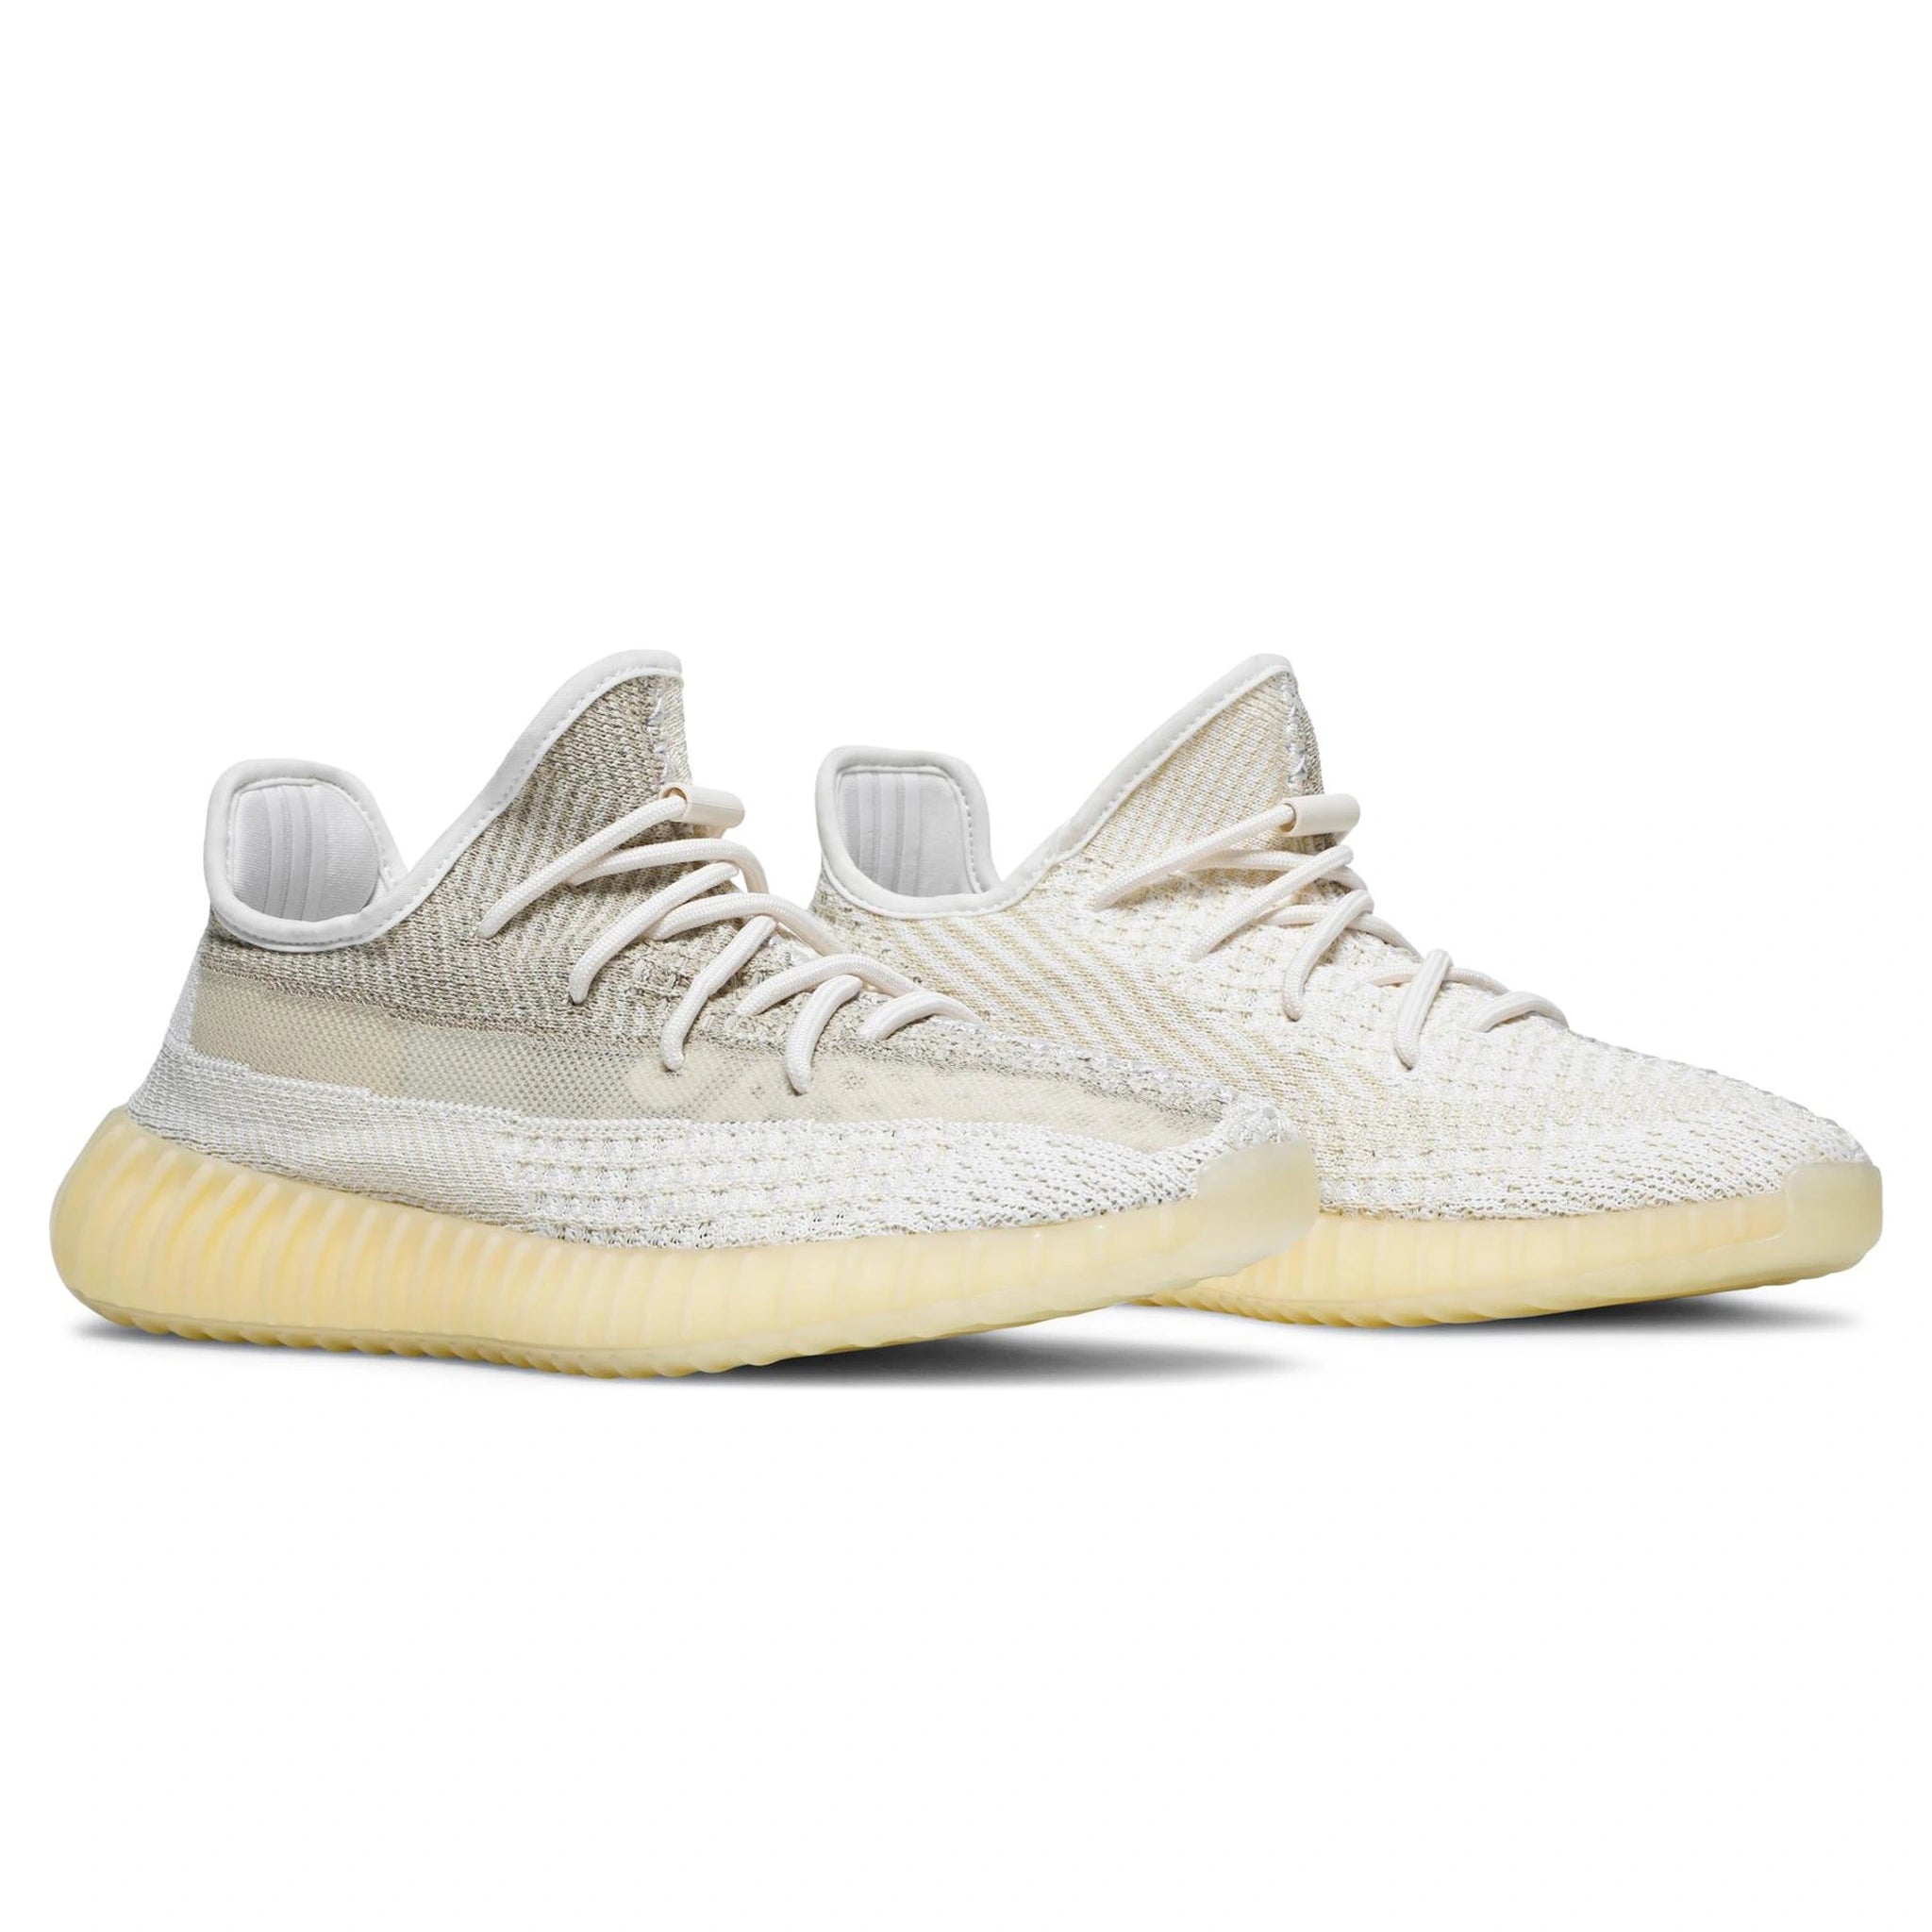 Front side view of Adidas Yeezy Boost 350 V2 Natural FZ5246